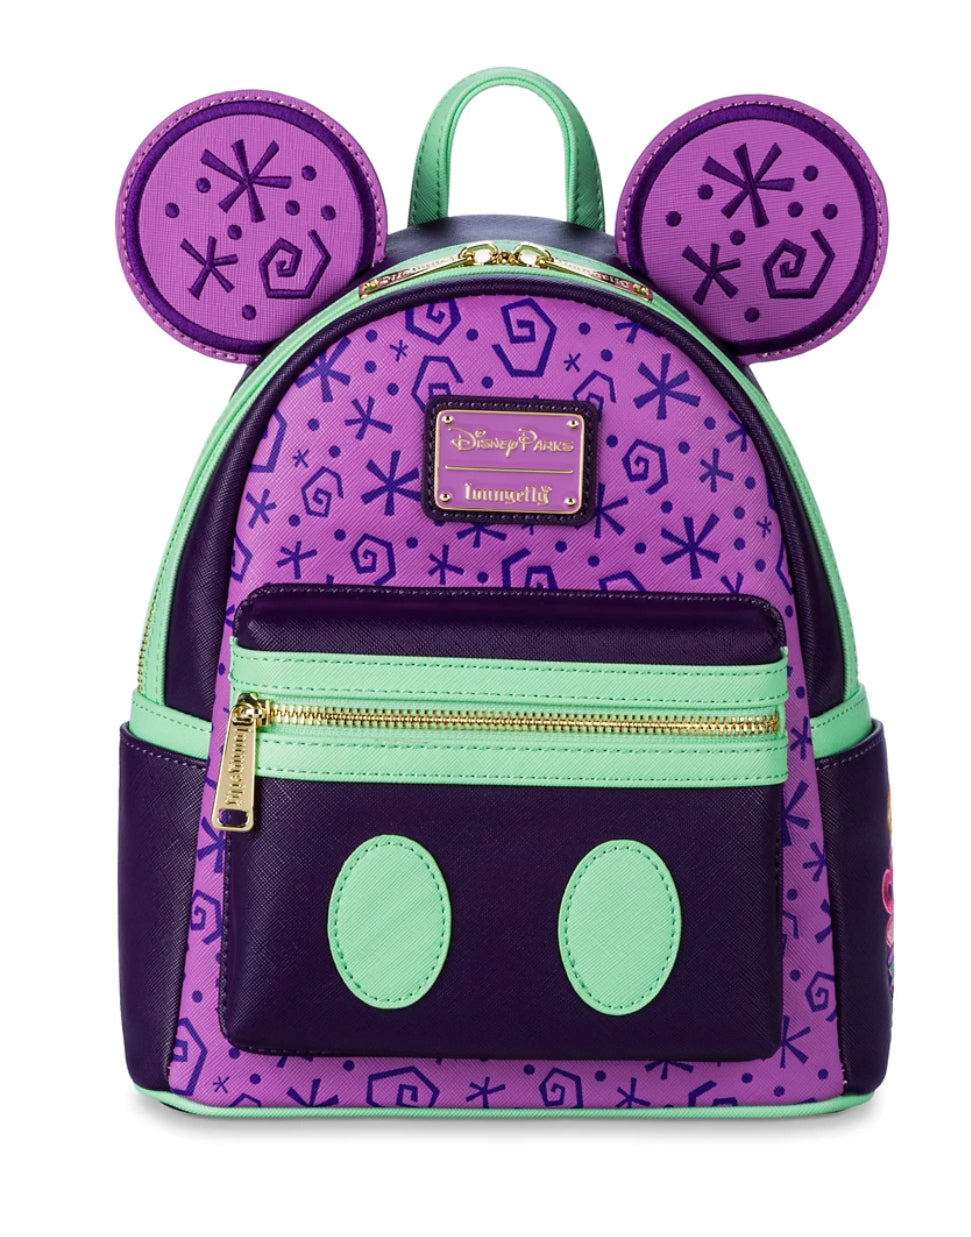 Loungefly Tiki Room MMMA Mini Backpack Minnie Mouse Main Attraction